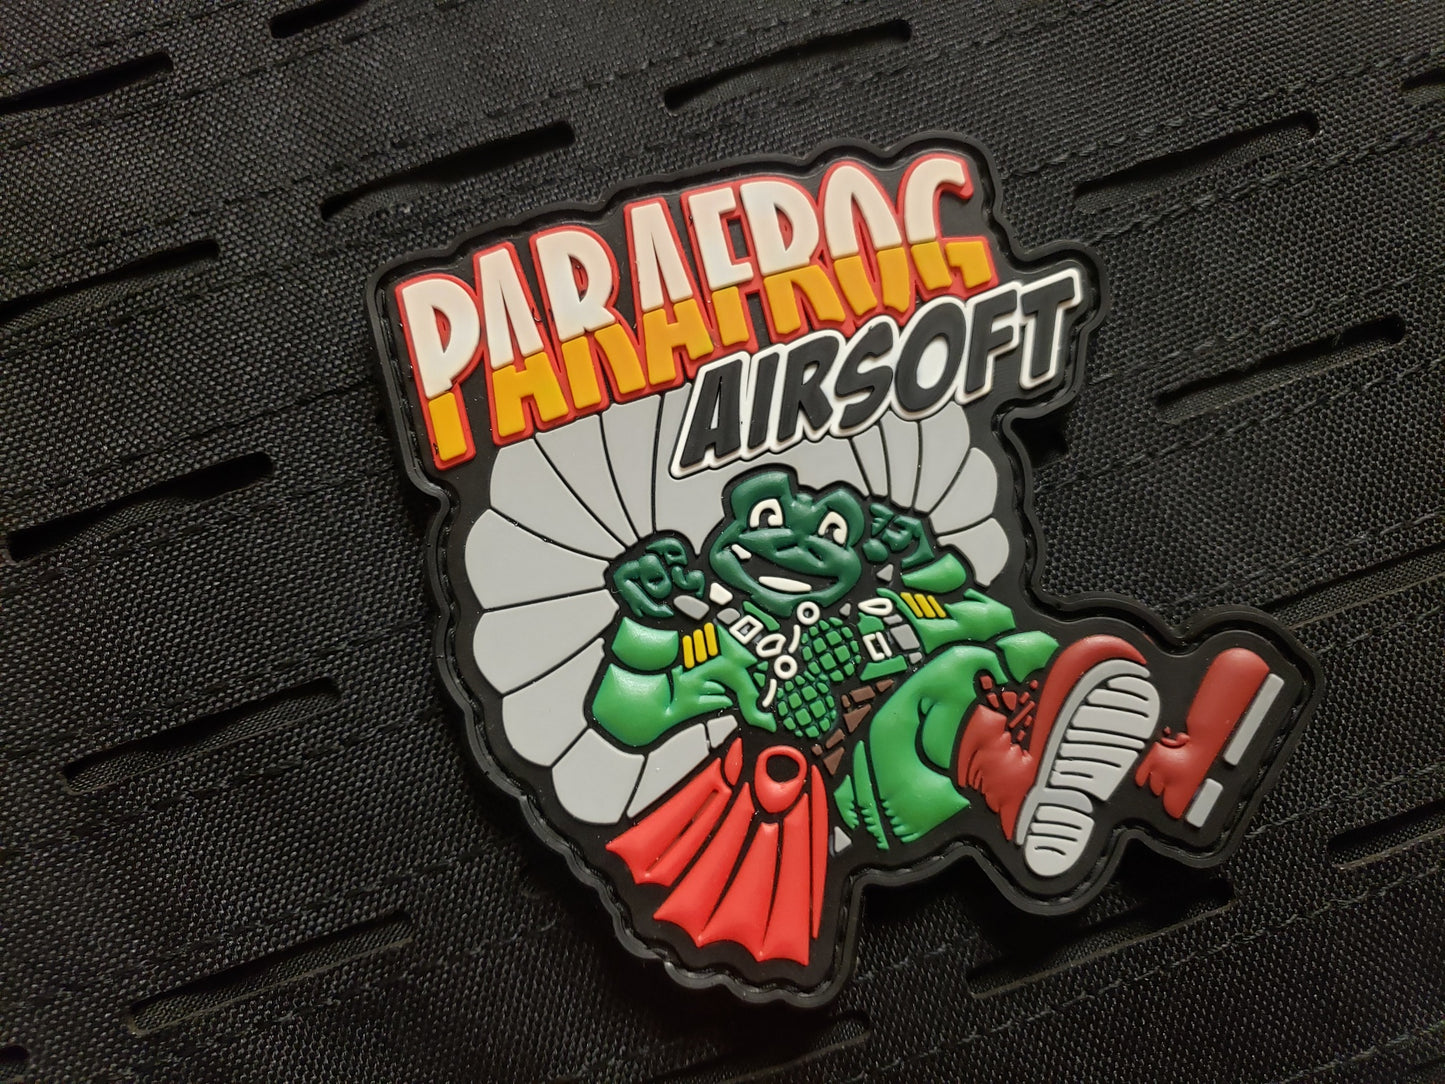 Parafrog Airsoft Patch